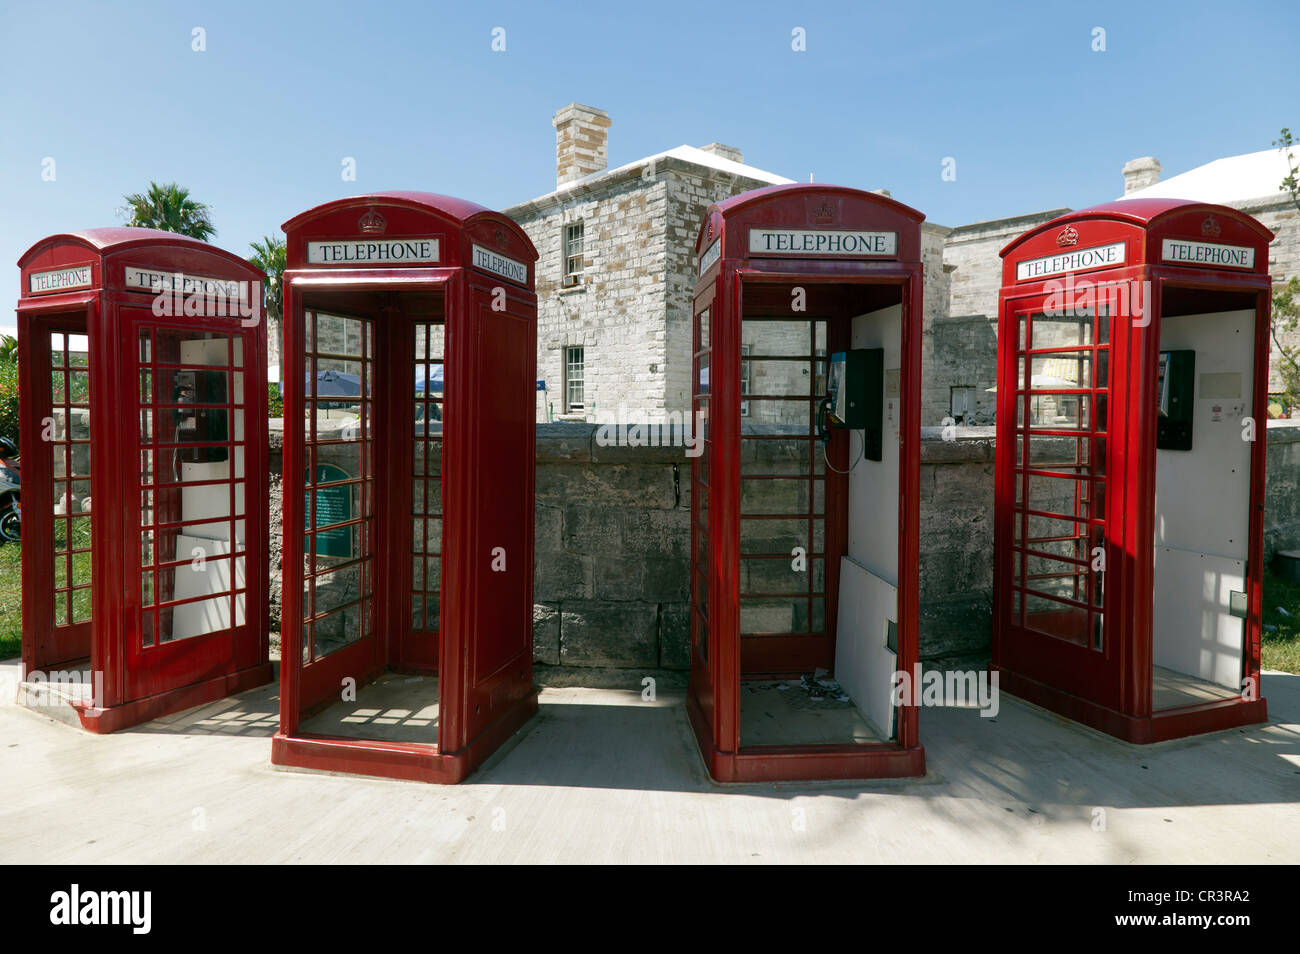 Four old fashioned British-style telephone booths outside the old Victualling Yard, Royal Naval Dockyard, Bermuda Stock Photo